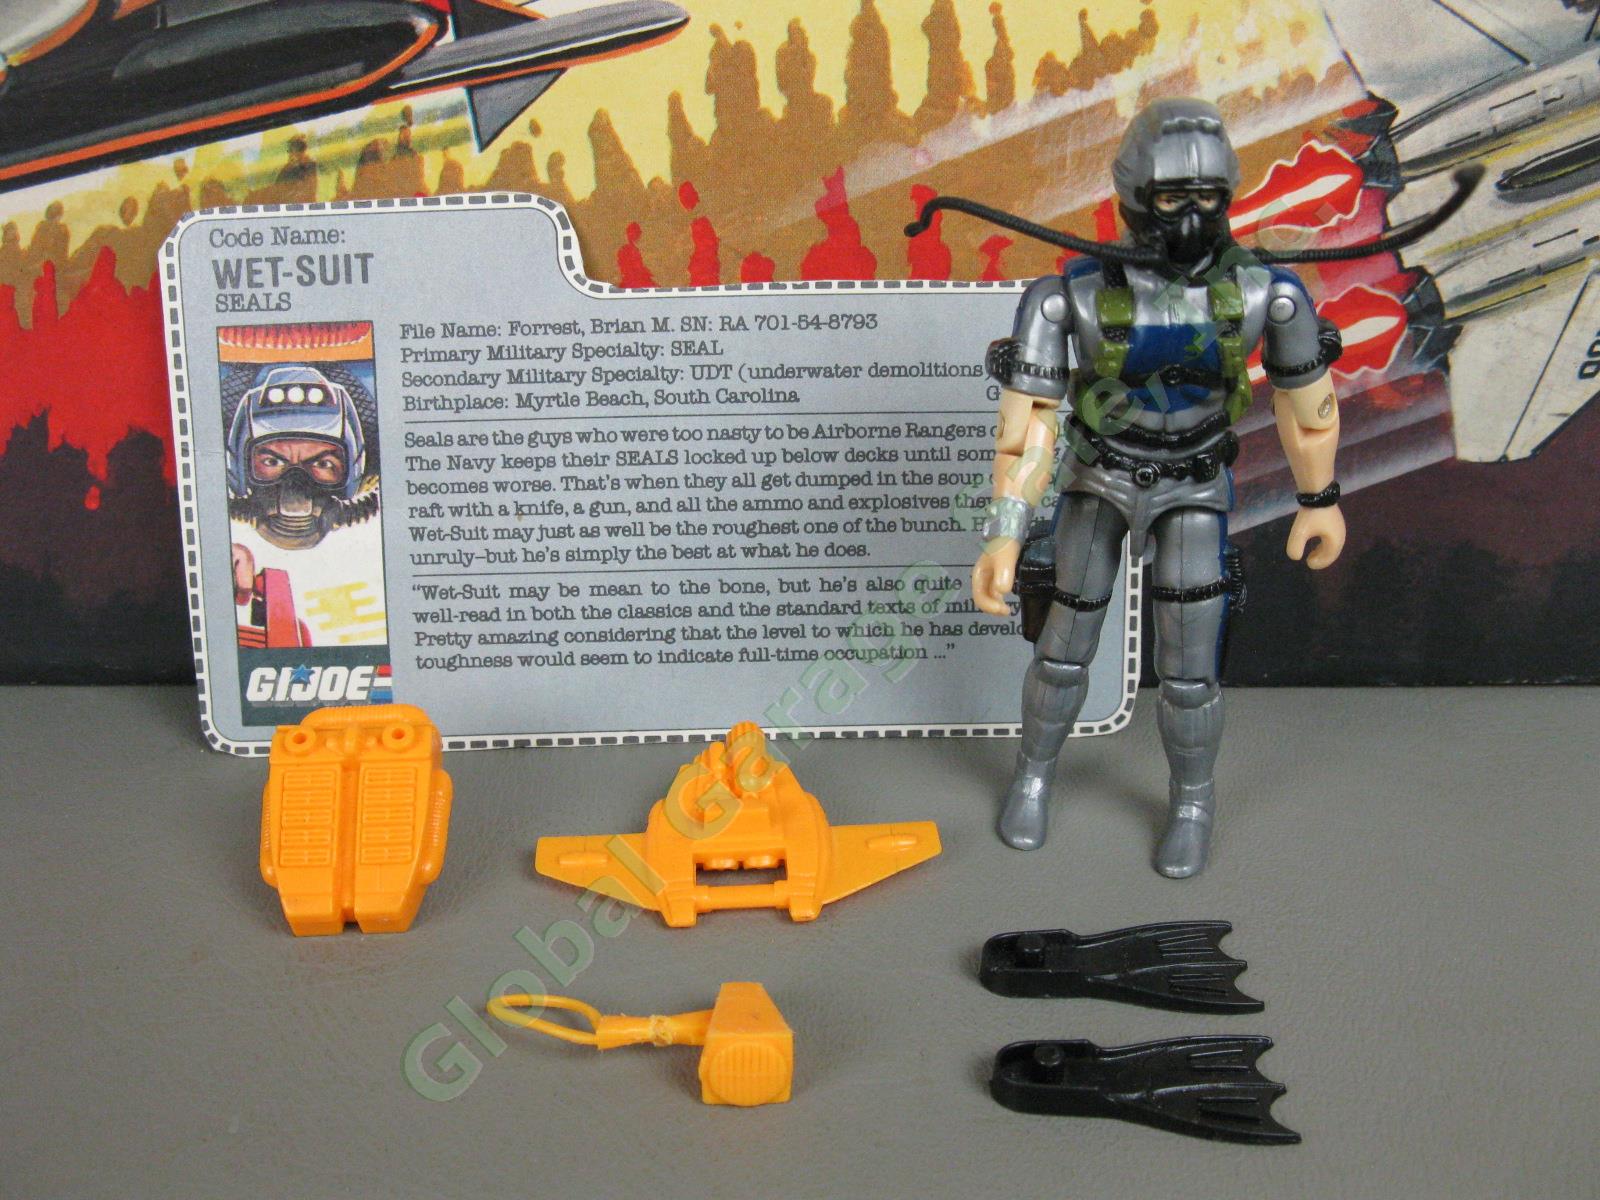 100% COMPLETE 1986 GI Joe Special Mission Brazil Wetsuit SEAL Diver Filecard NR